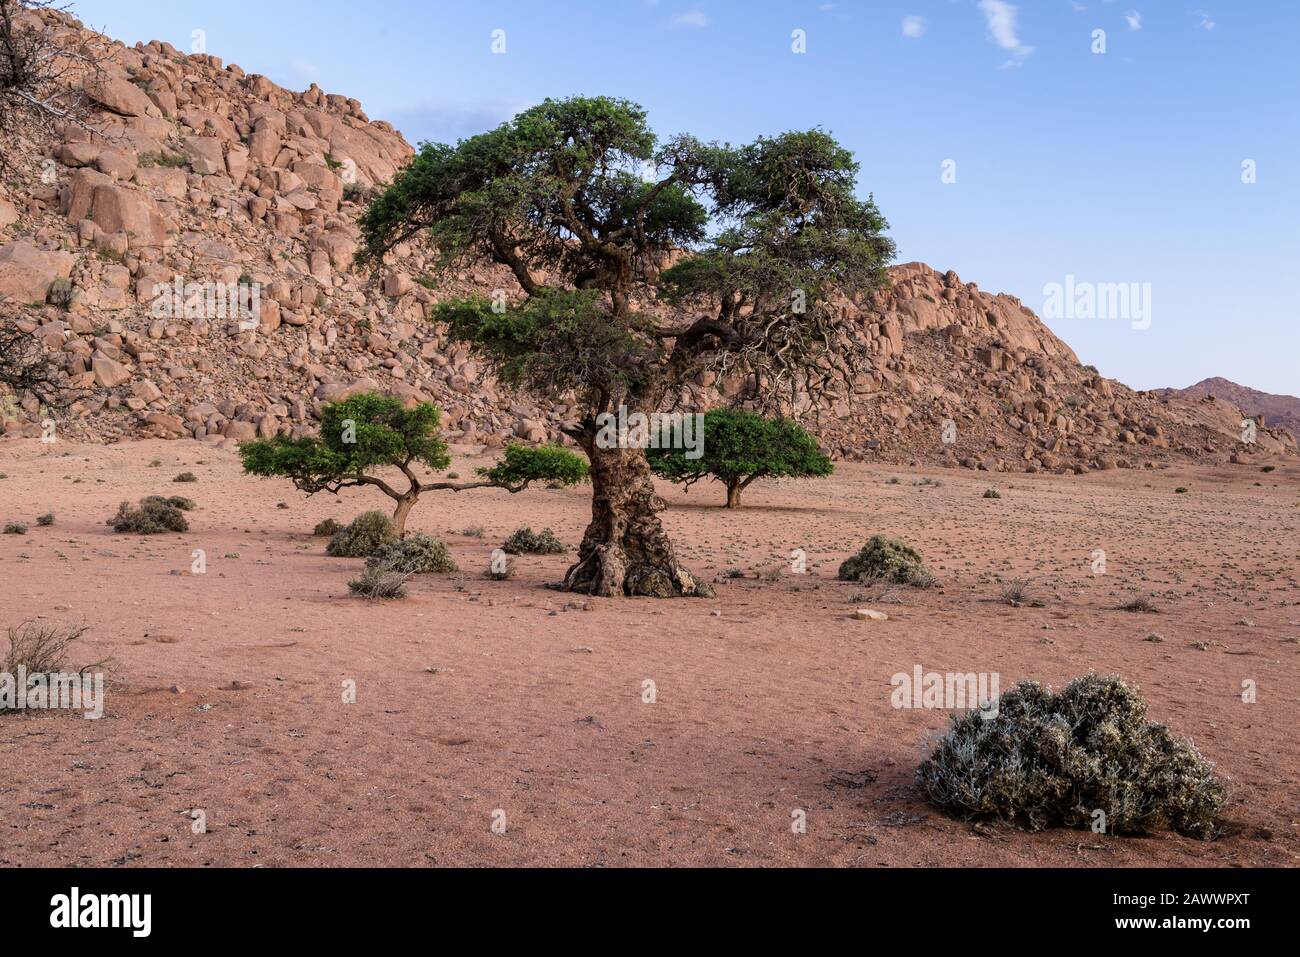 Acacia trees in Namibia's desert are framed by a rocky outcrop in the southern African country Stock Photo